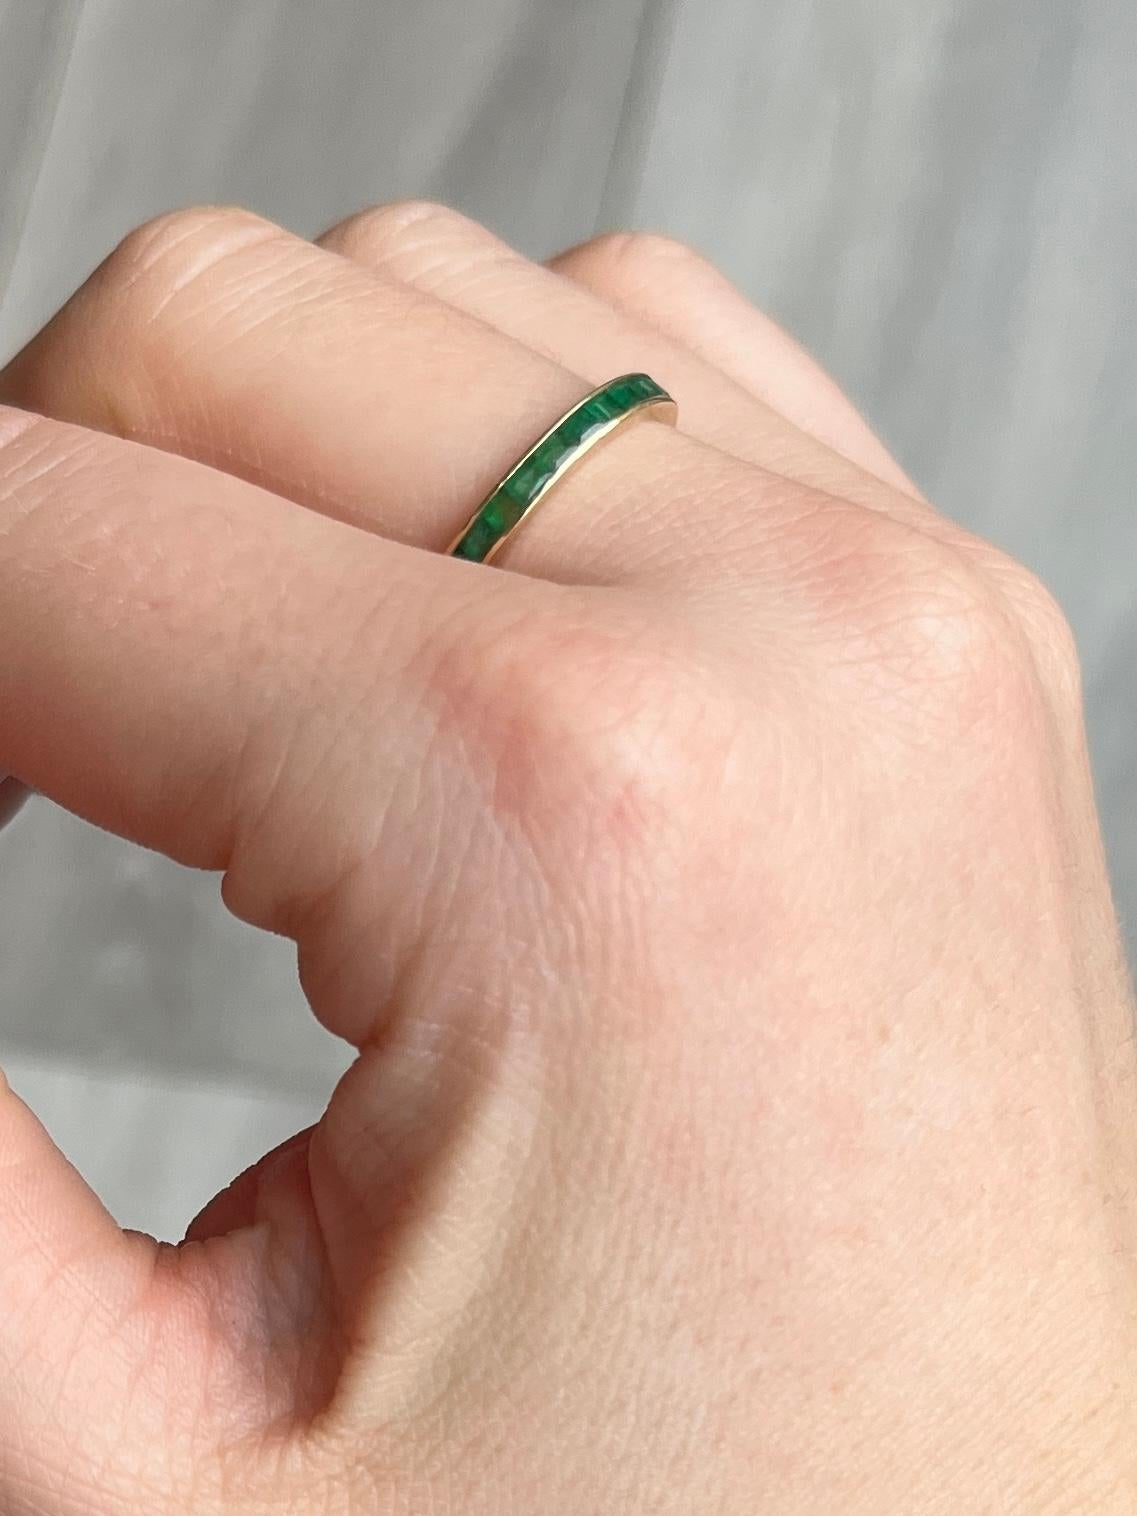 The emeralds set within this 14ct gold band are square cut and measure 5pts each. They are beautifully bright stones. emerald total approx 1.4ct.

Ring Size: M or 6 1/4 
Band Width: 2.5mm 

Weight: 1.3g